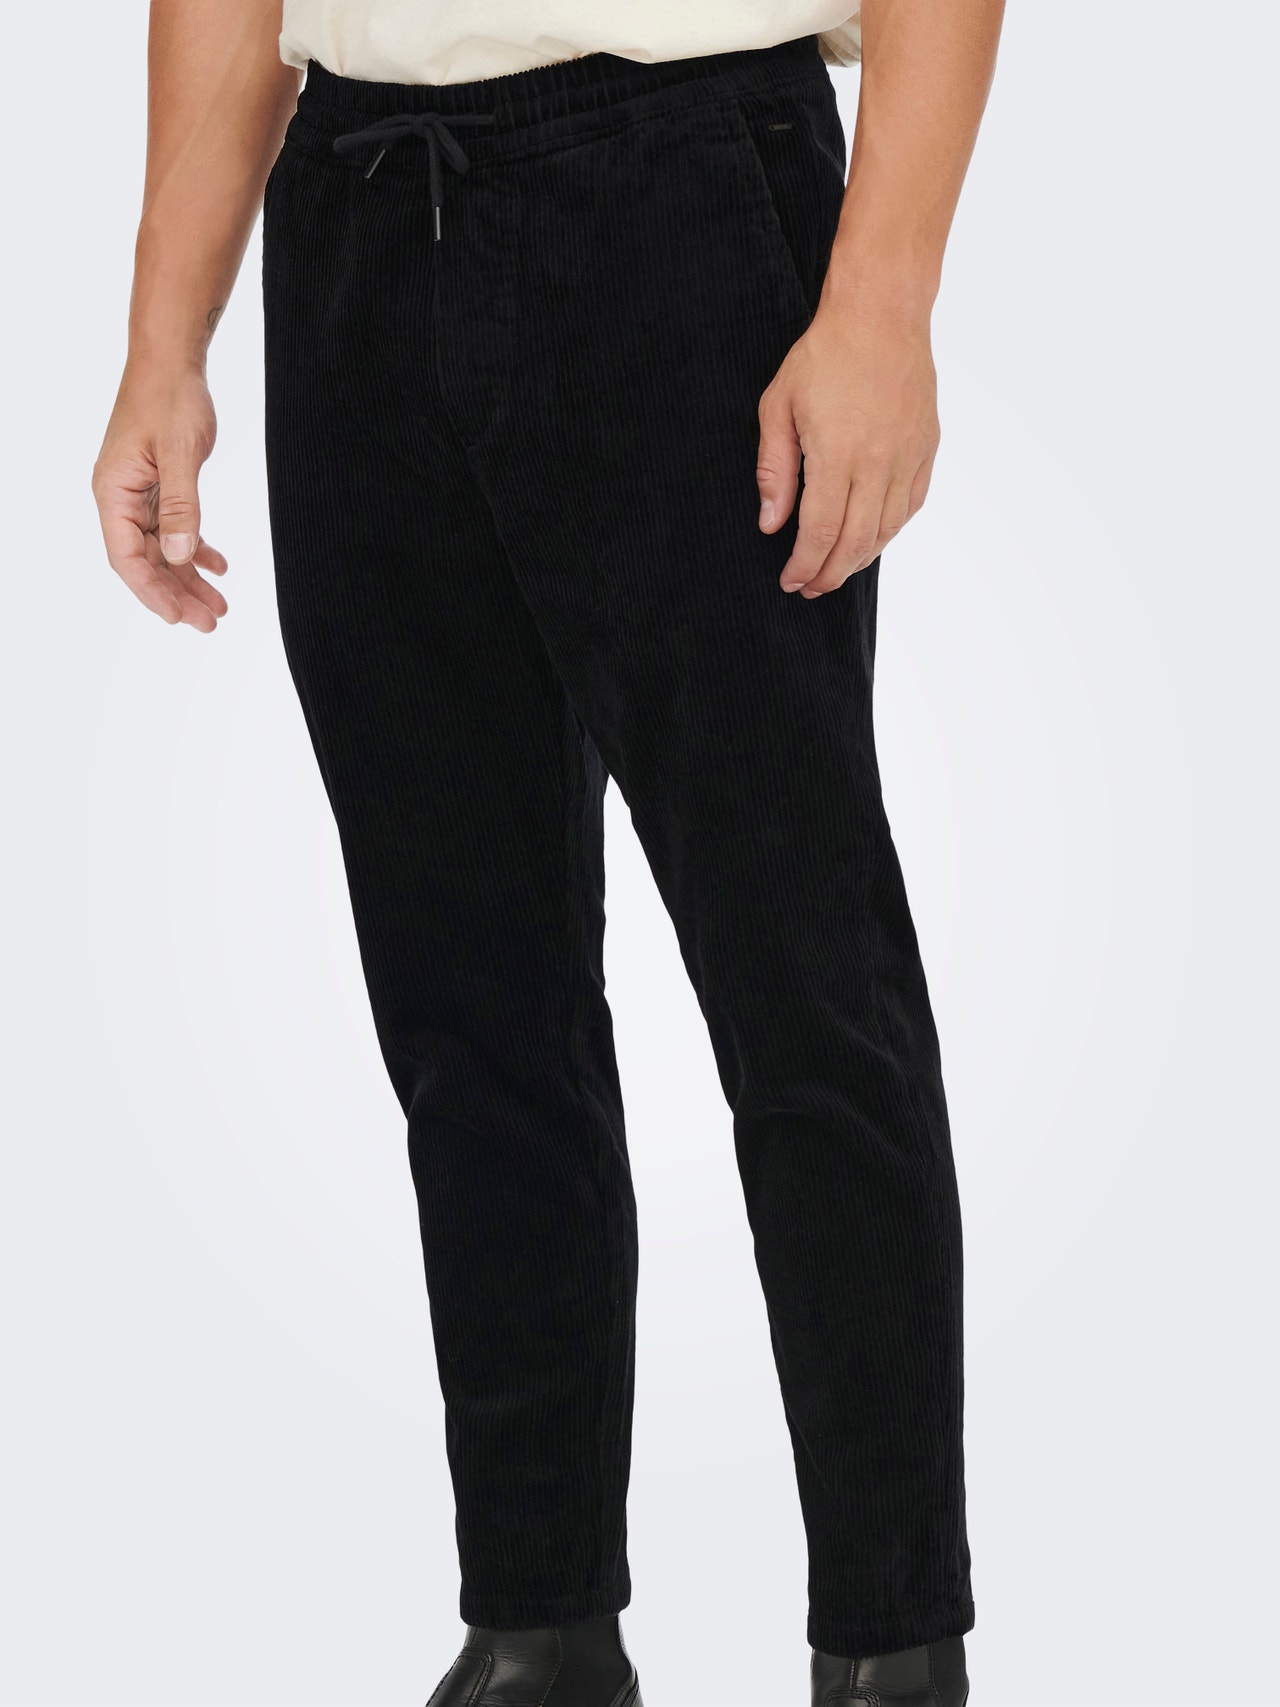 ONLY & SONS ONSLINUS CROPPED CORD 9912 PANT NOOS -Black - 22019912